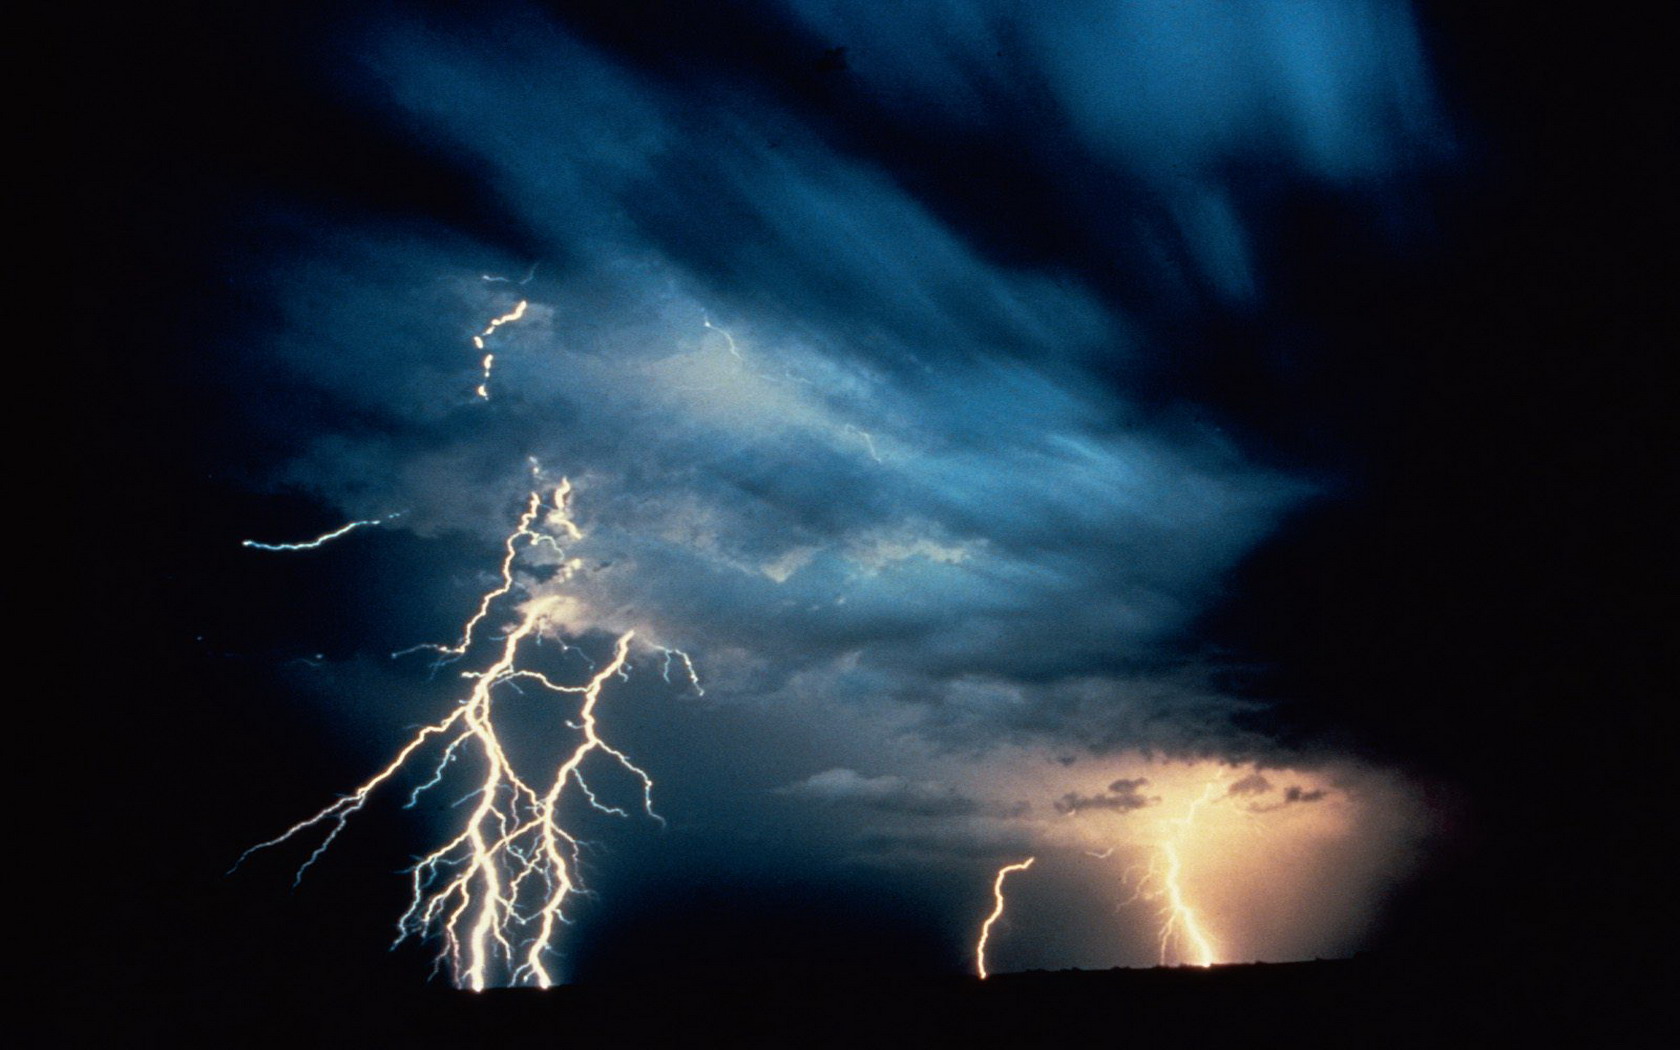 Thunderstorm backgrounds